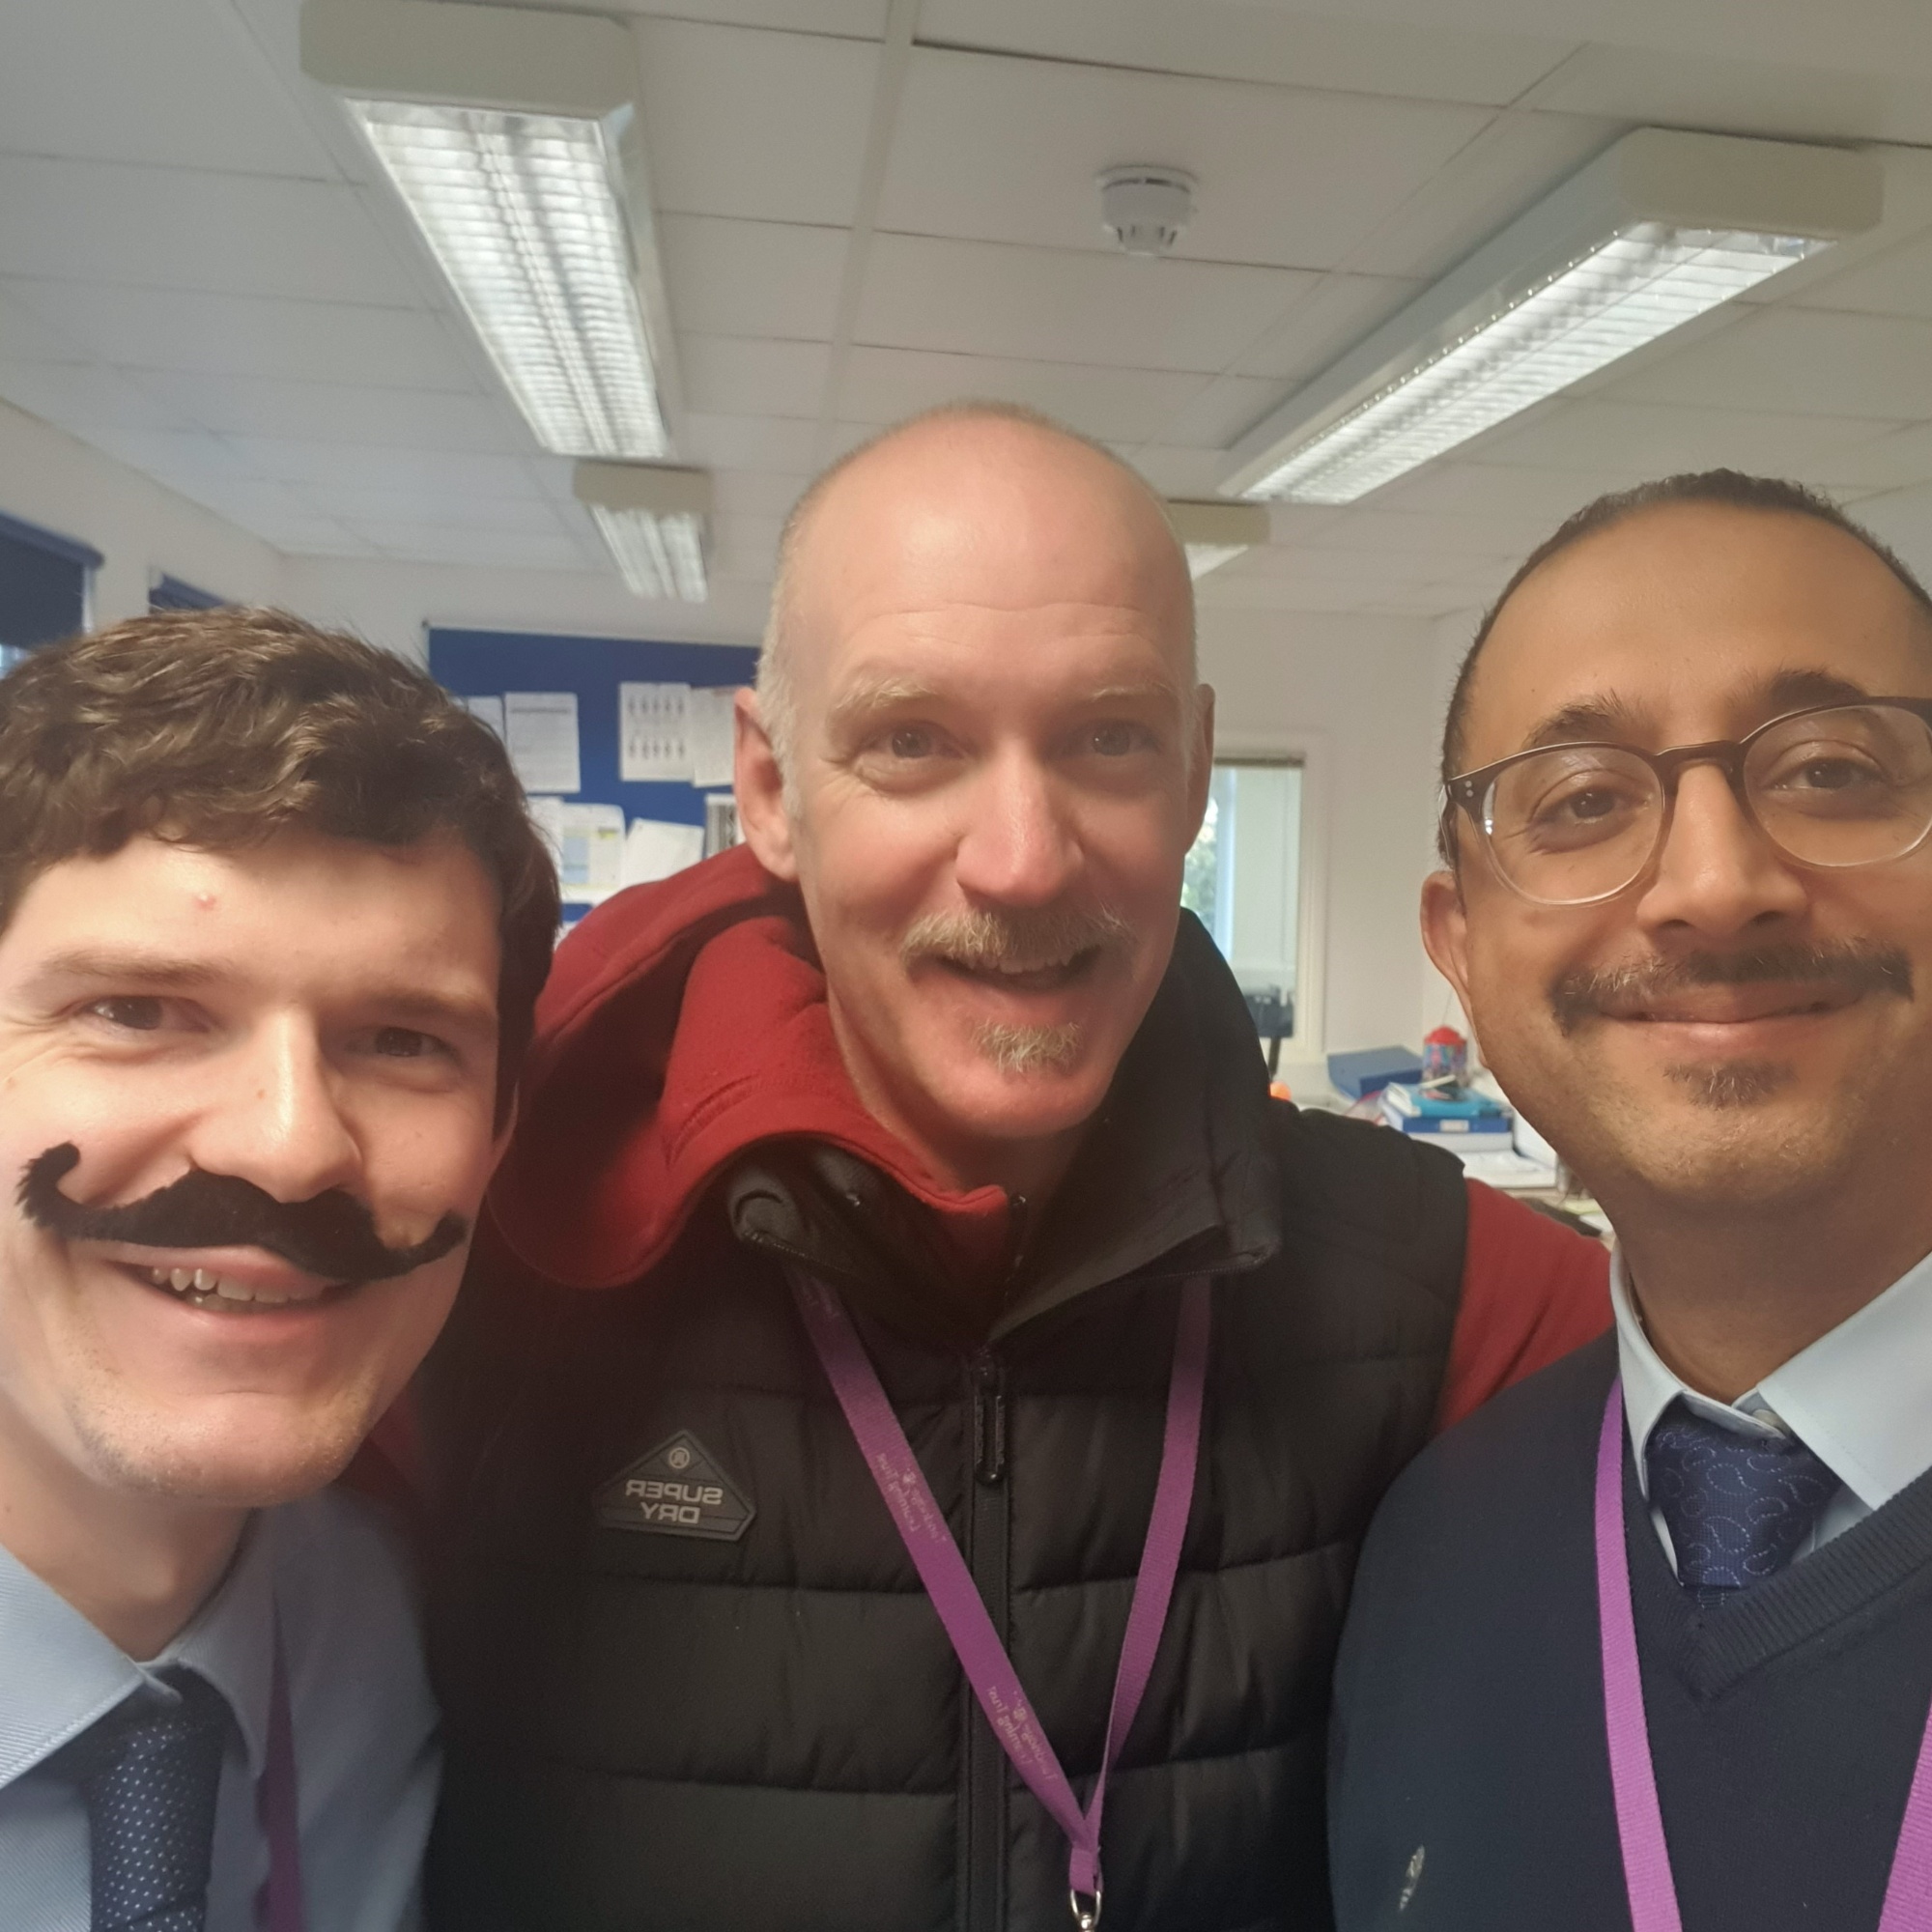 Mr Leay, Mr Mills & Mr Chotai with moustaches for Movember